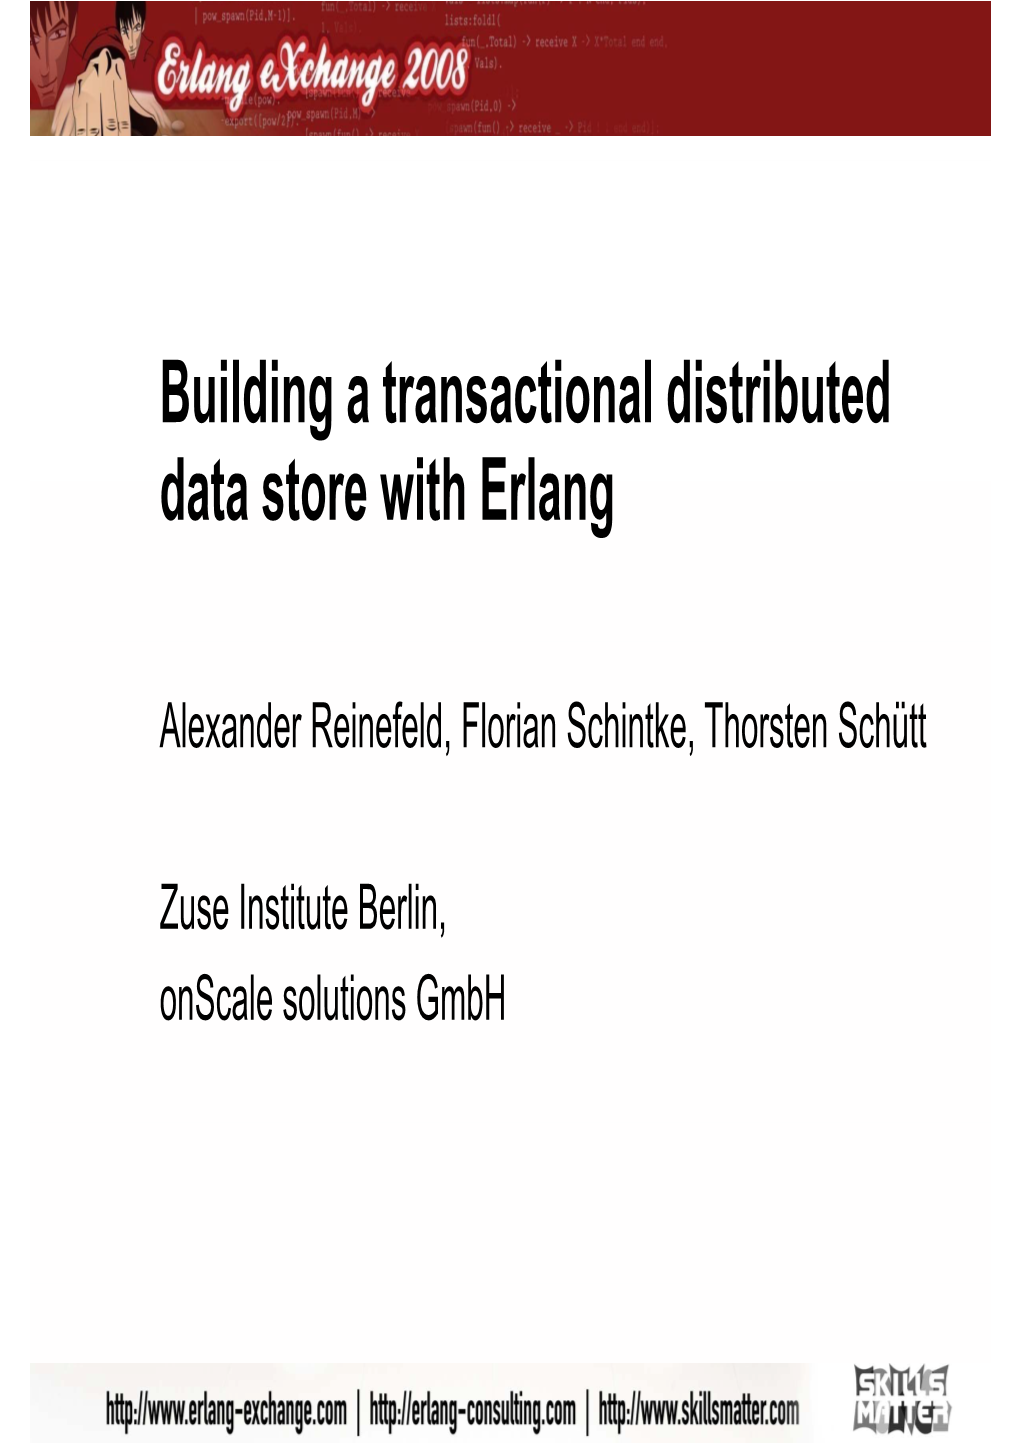 Building a Transactional Distributed Data Store with Erlang